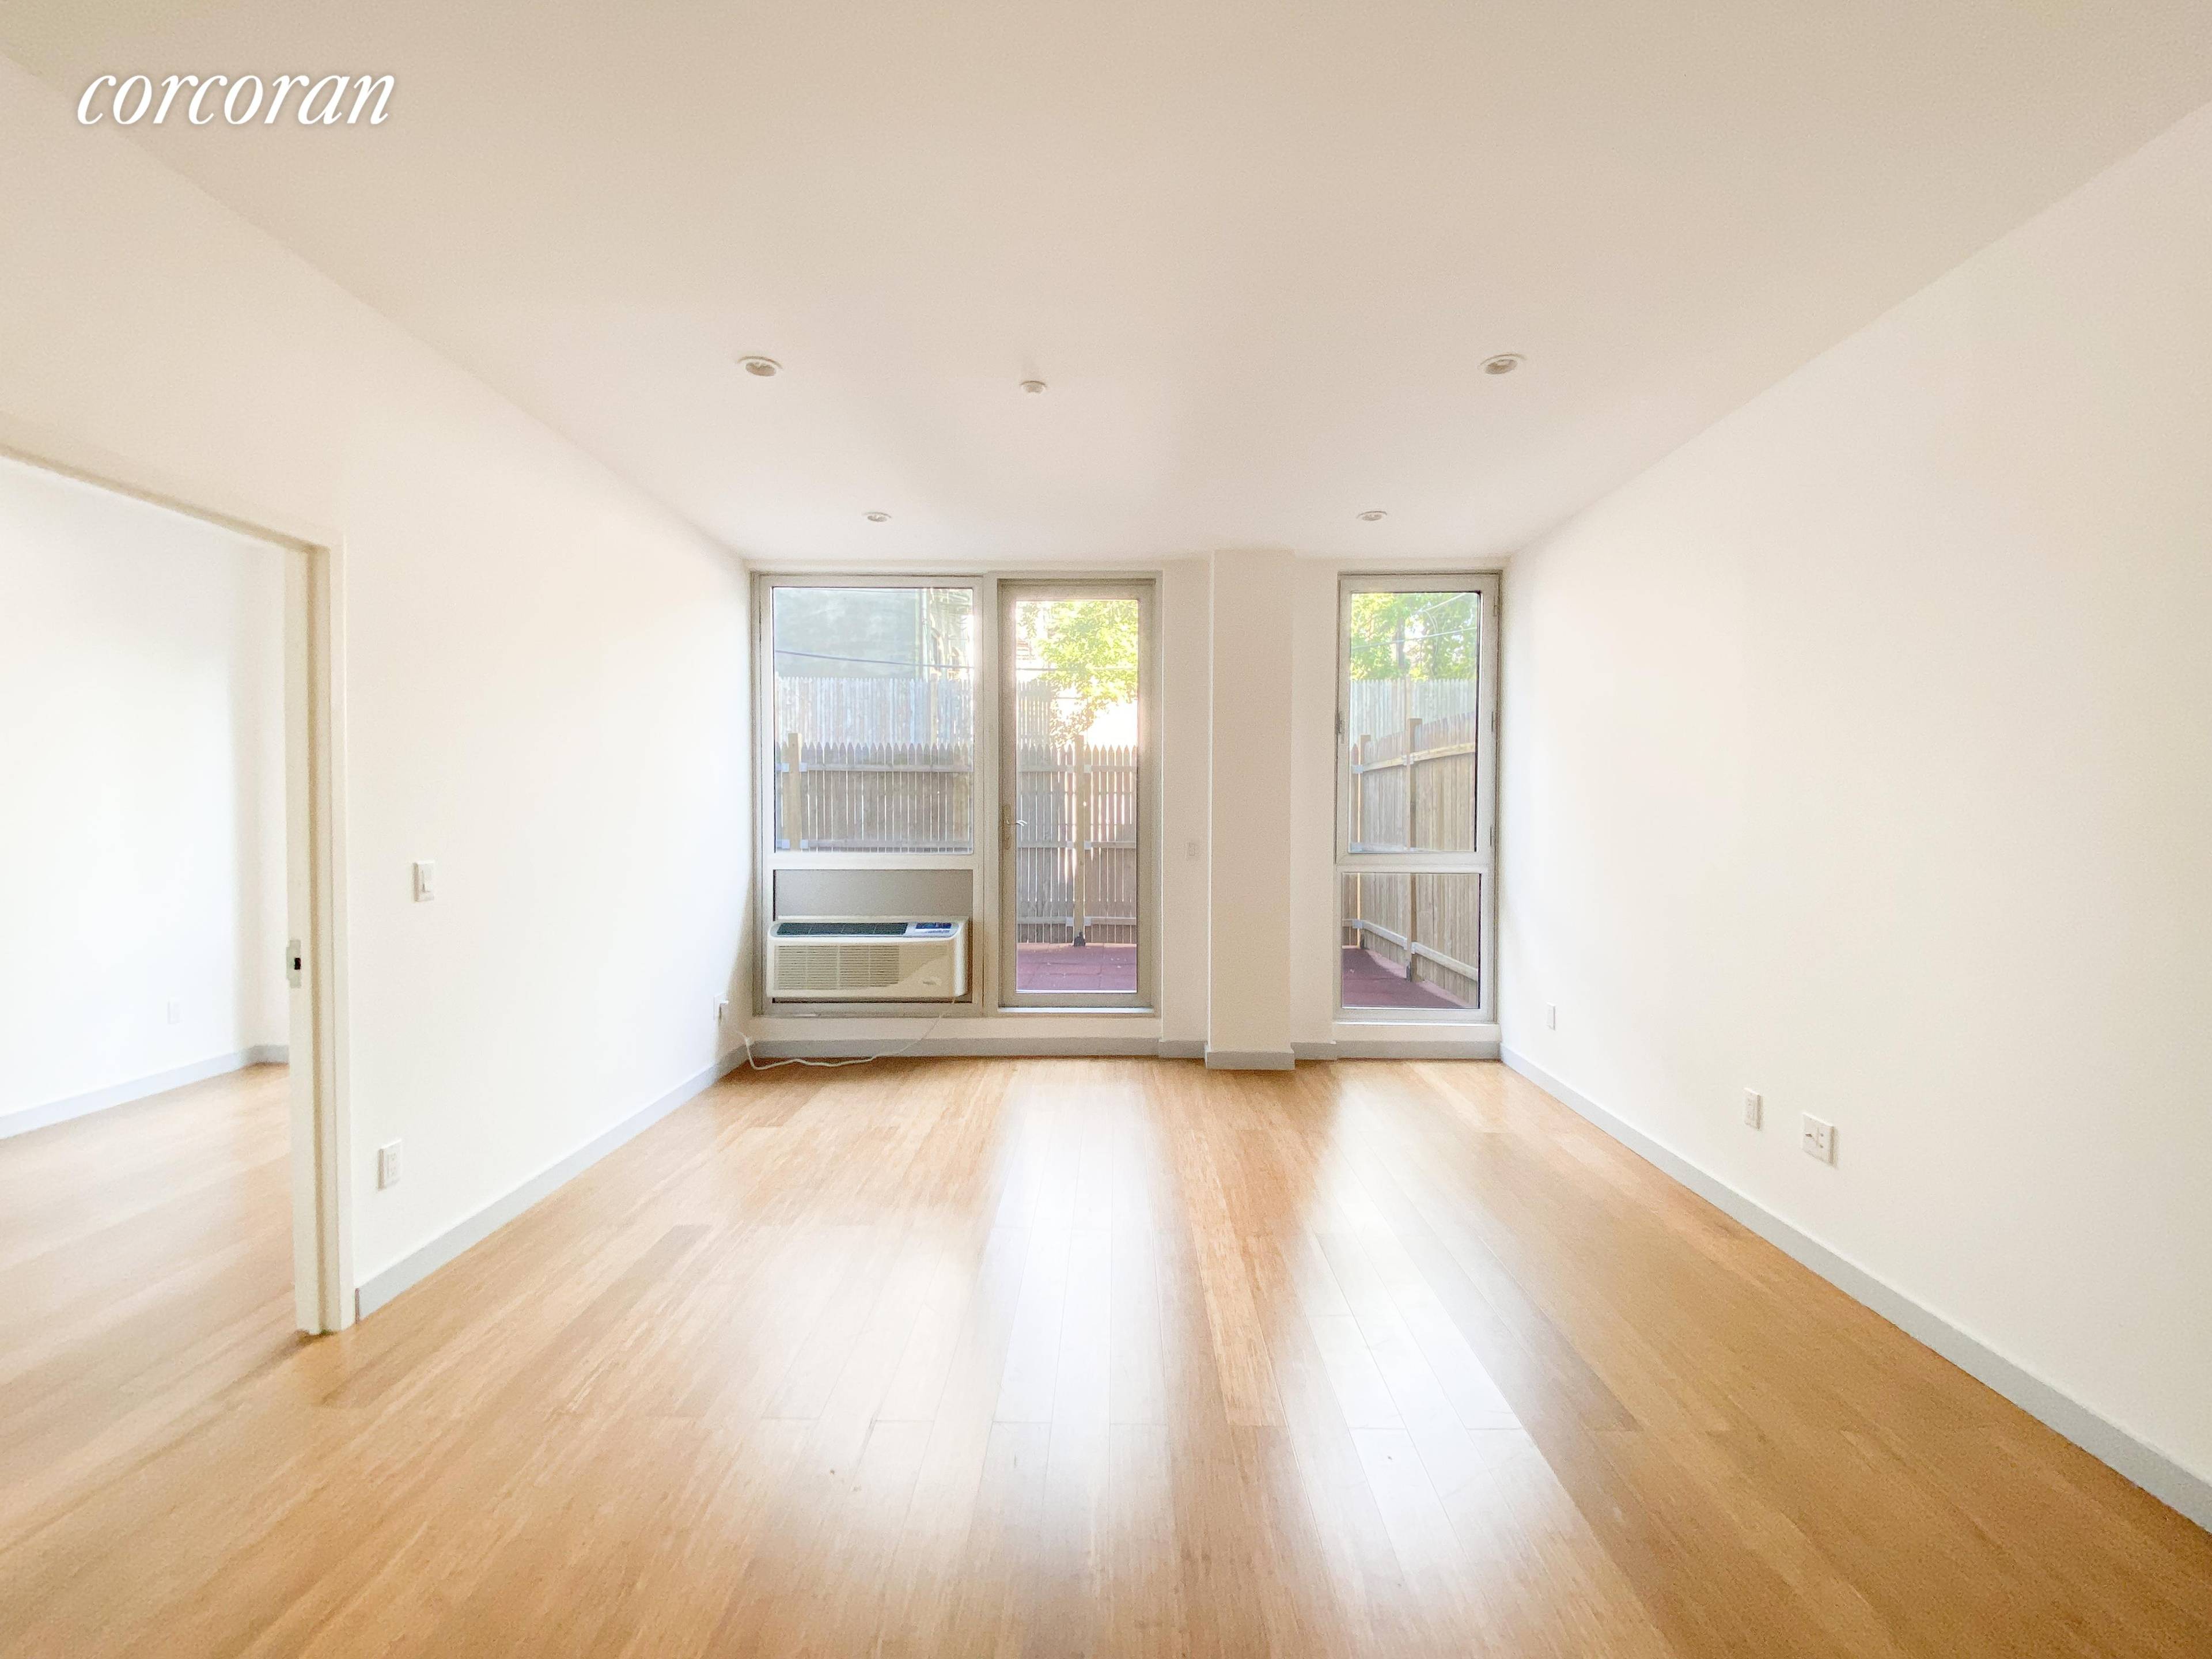 MOVE IN READY ! 4907 Fourth offers tremendous value with spacious and efficient layouts, convenient amenities, and mesmerizing waterfront views of the Statue of Liberty and city skyline.